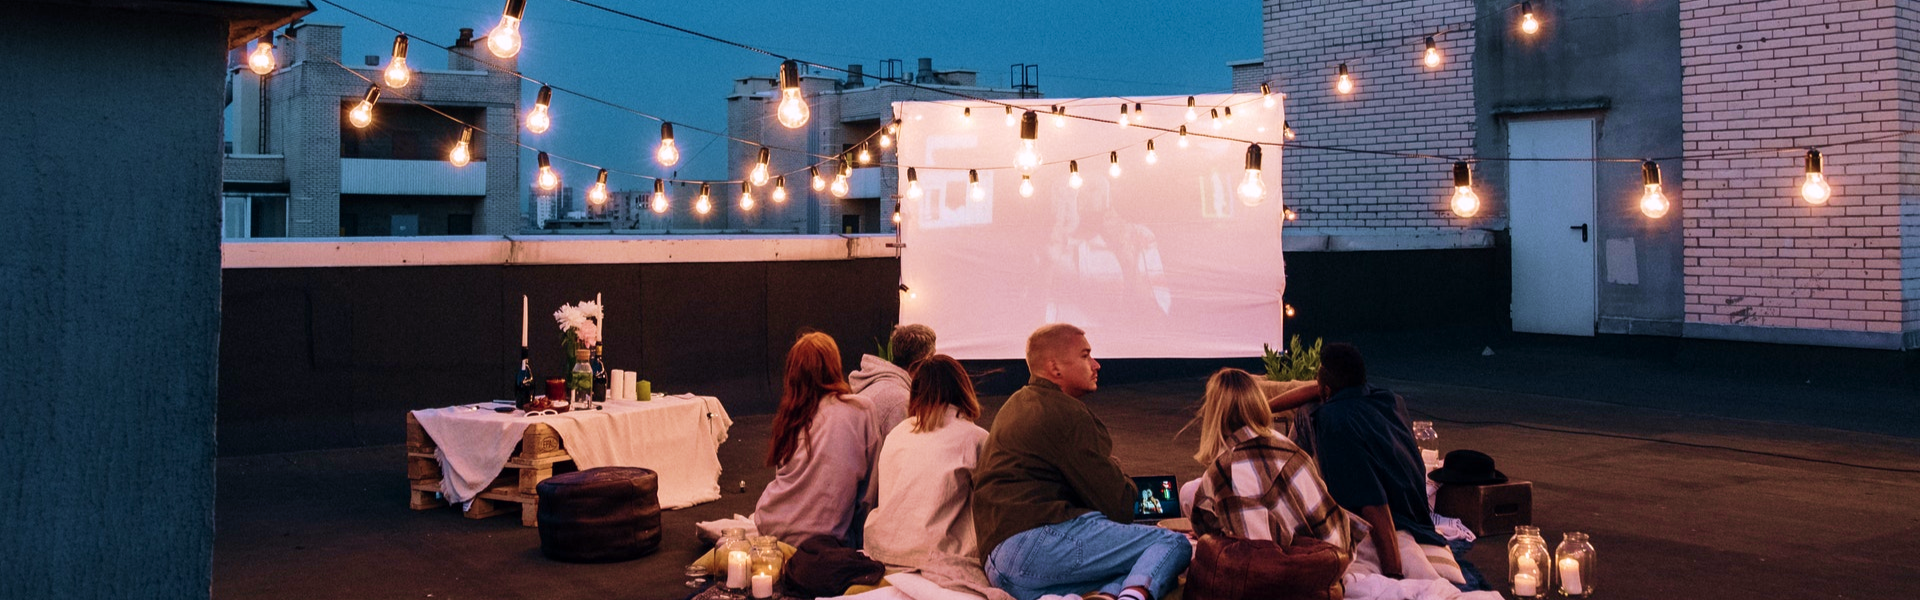 rooftop projector party